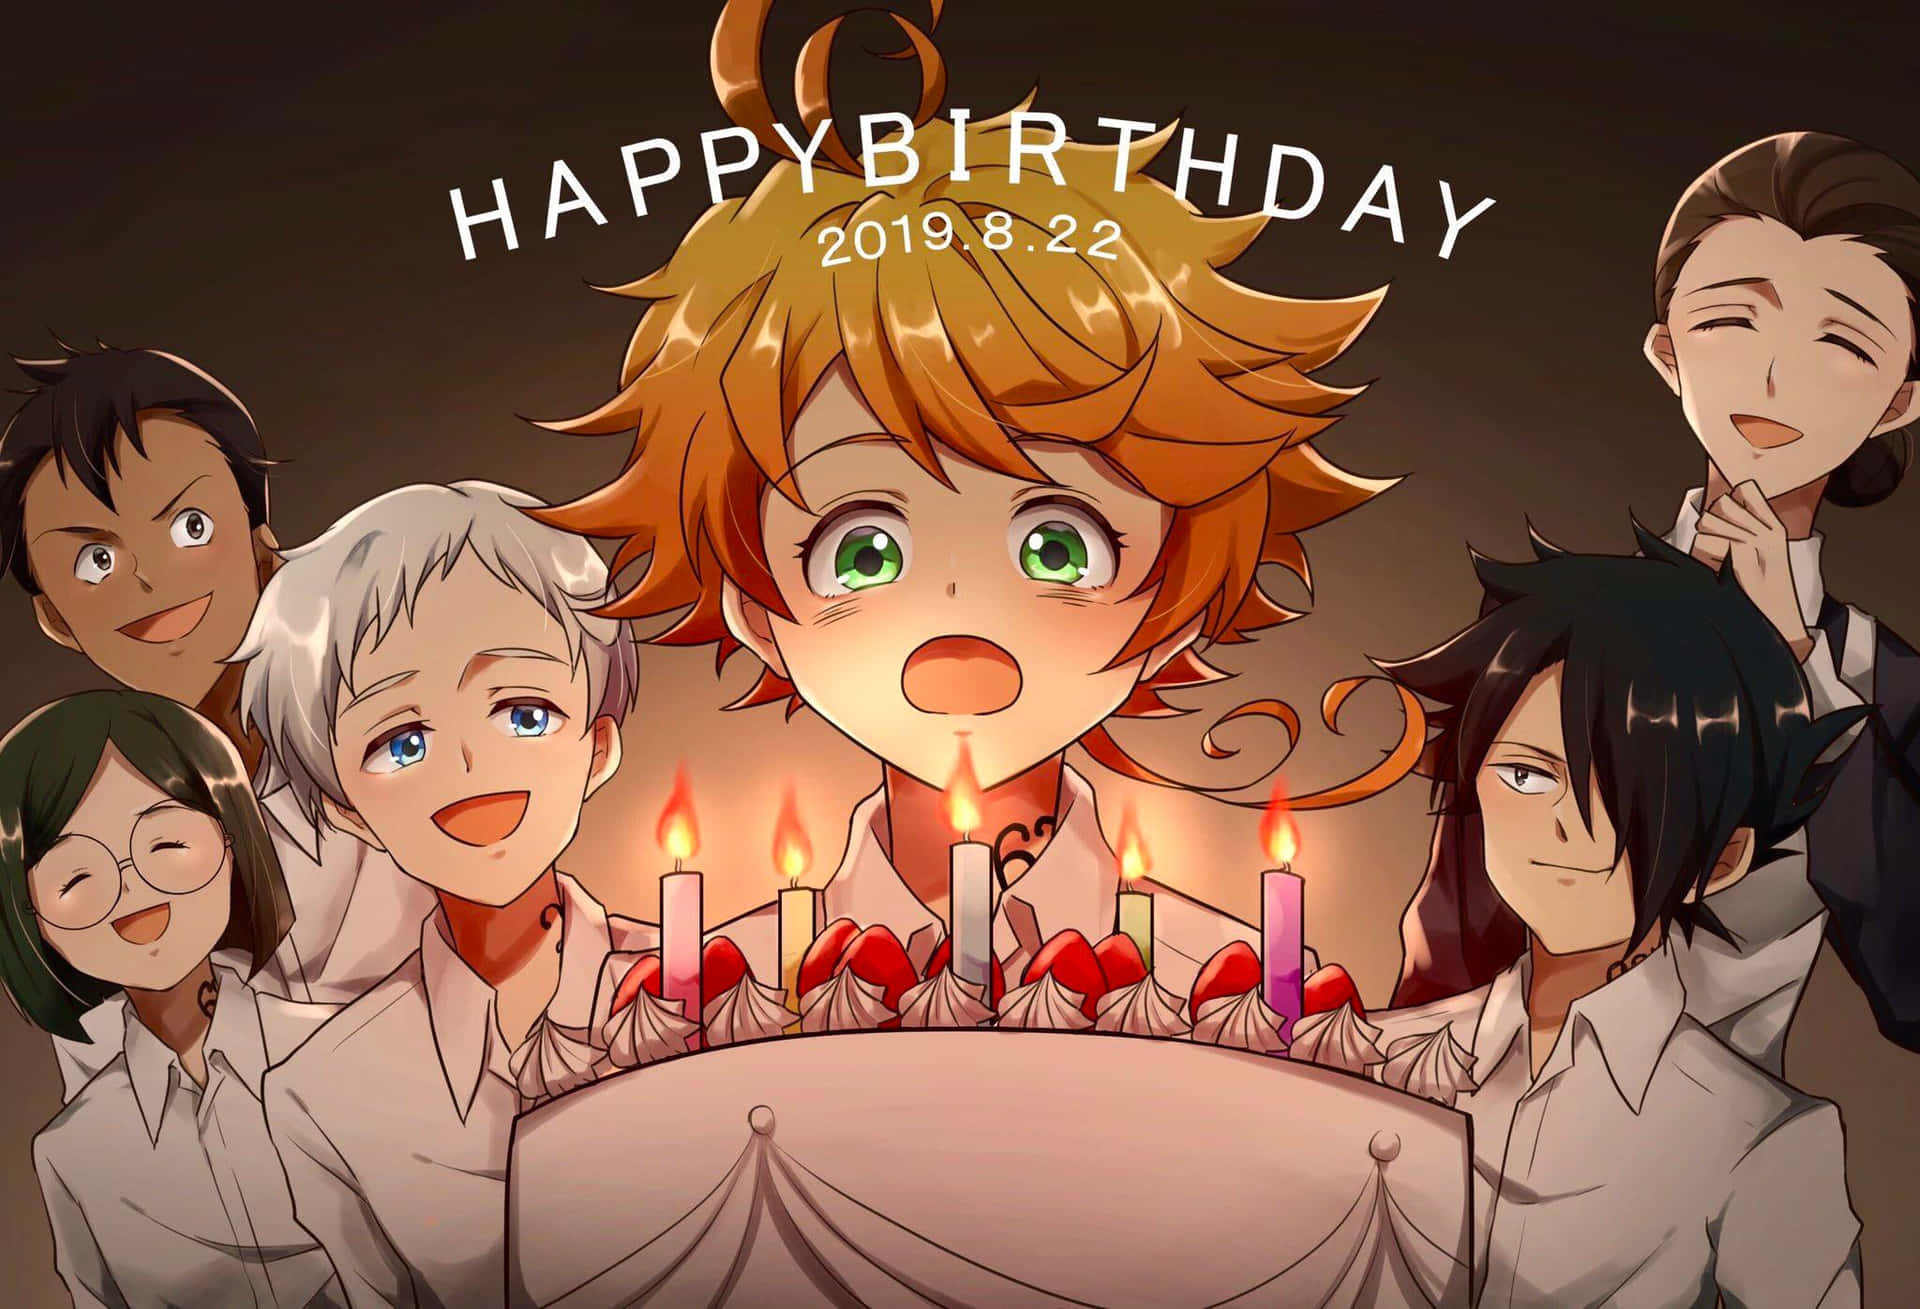 Have a wonderful Birthday with your favorite Anime characters! Wallpaper